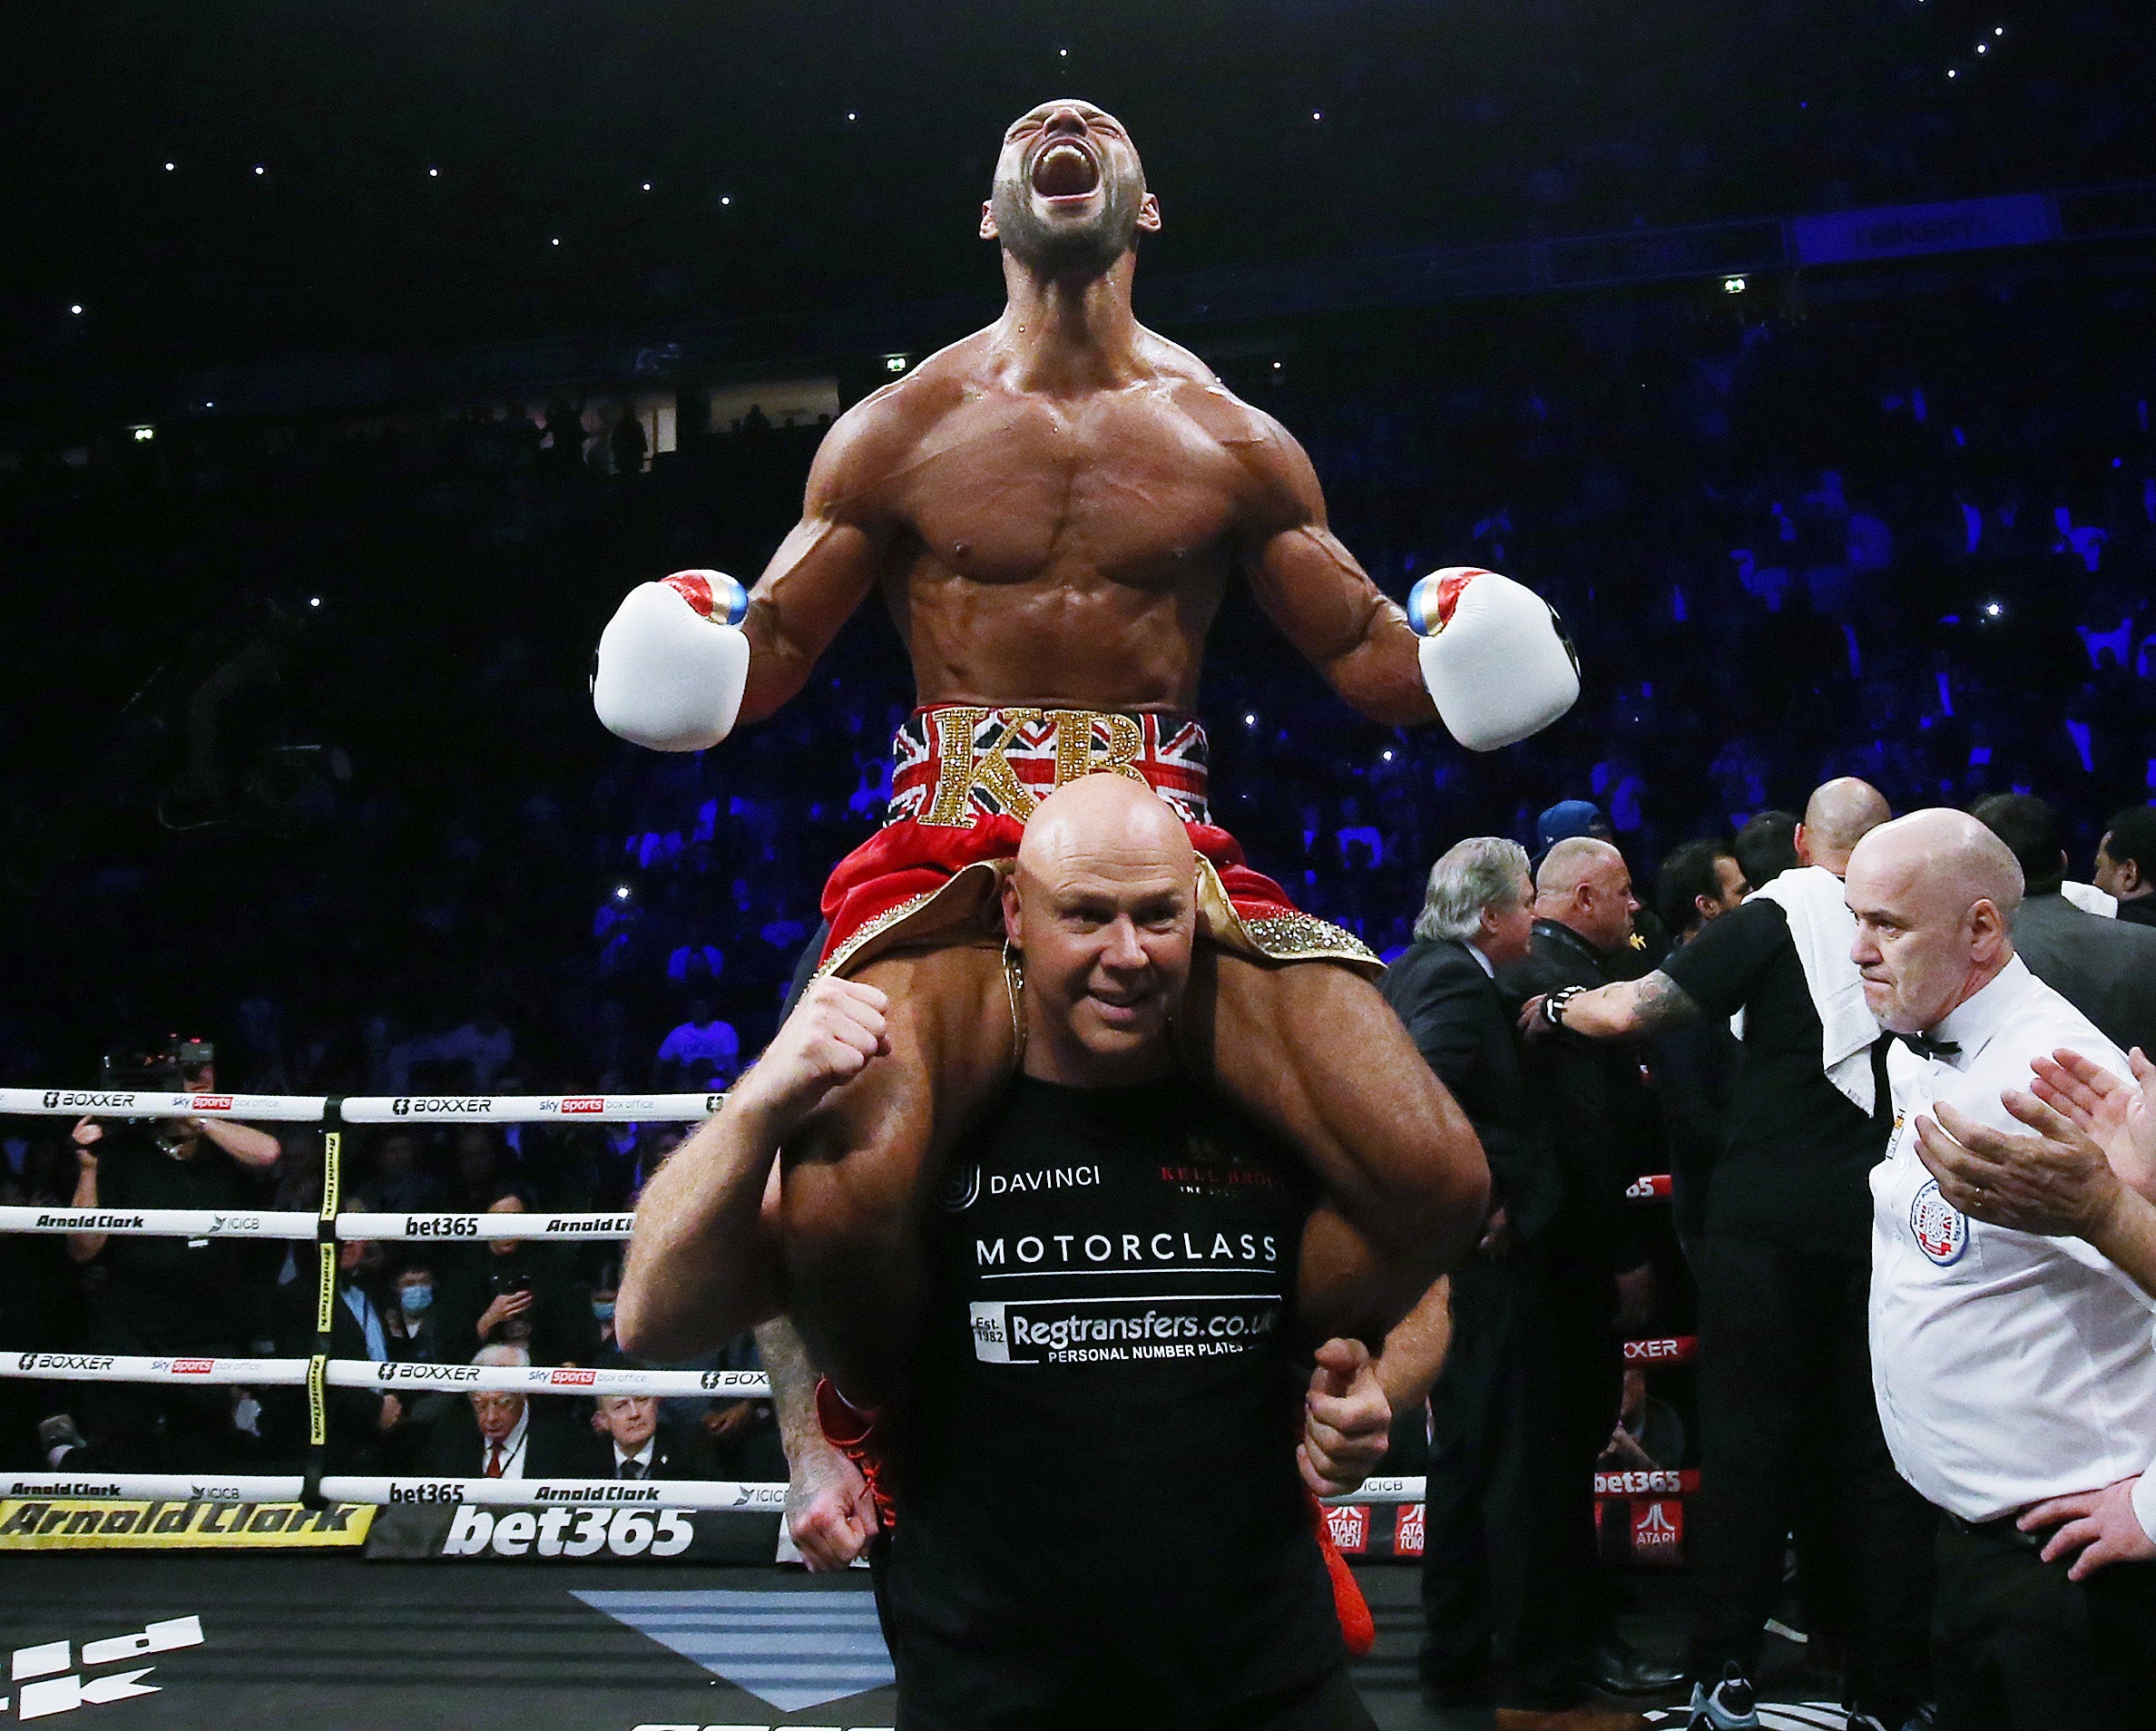 Khan vs Brook Who won the fight? The Independent